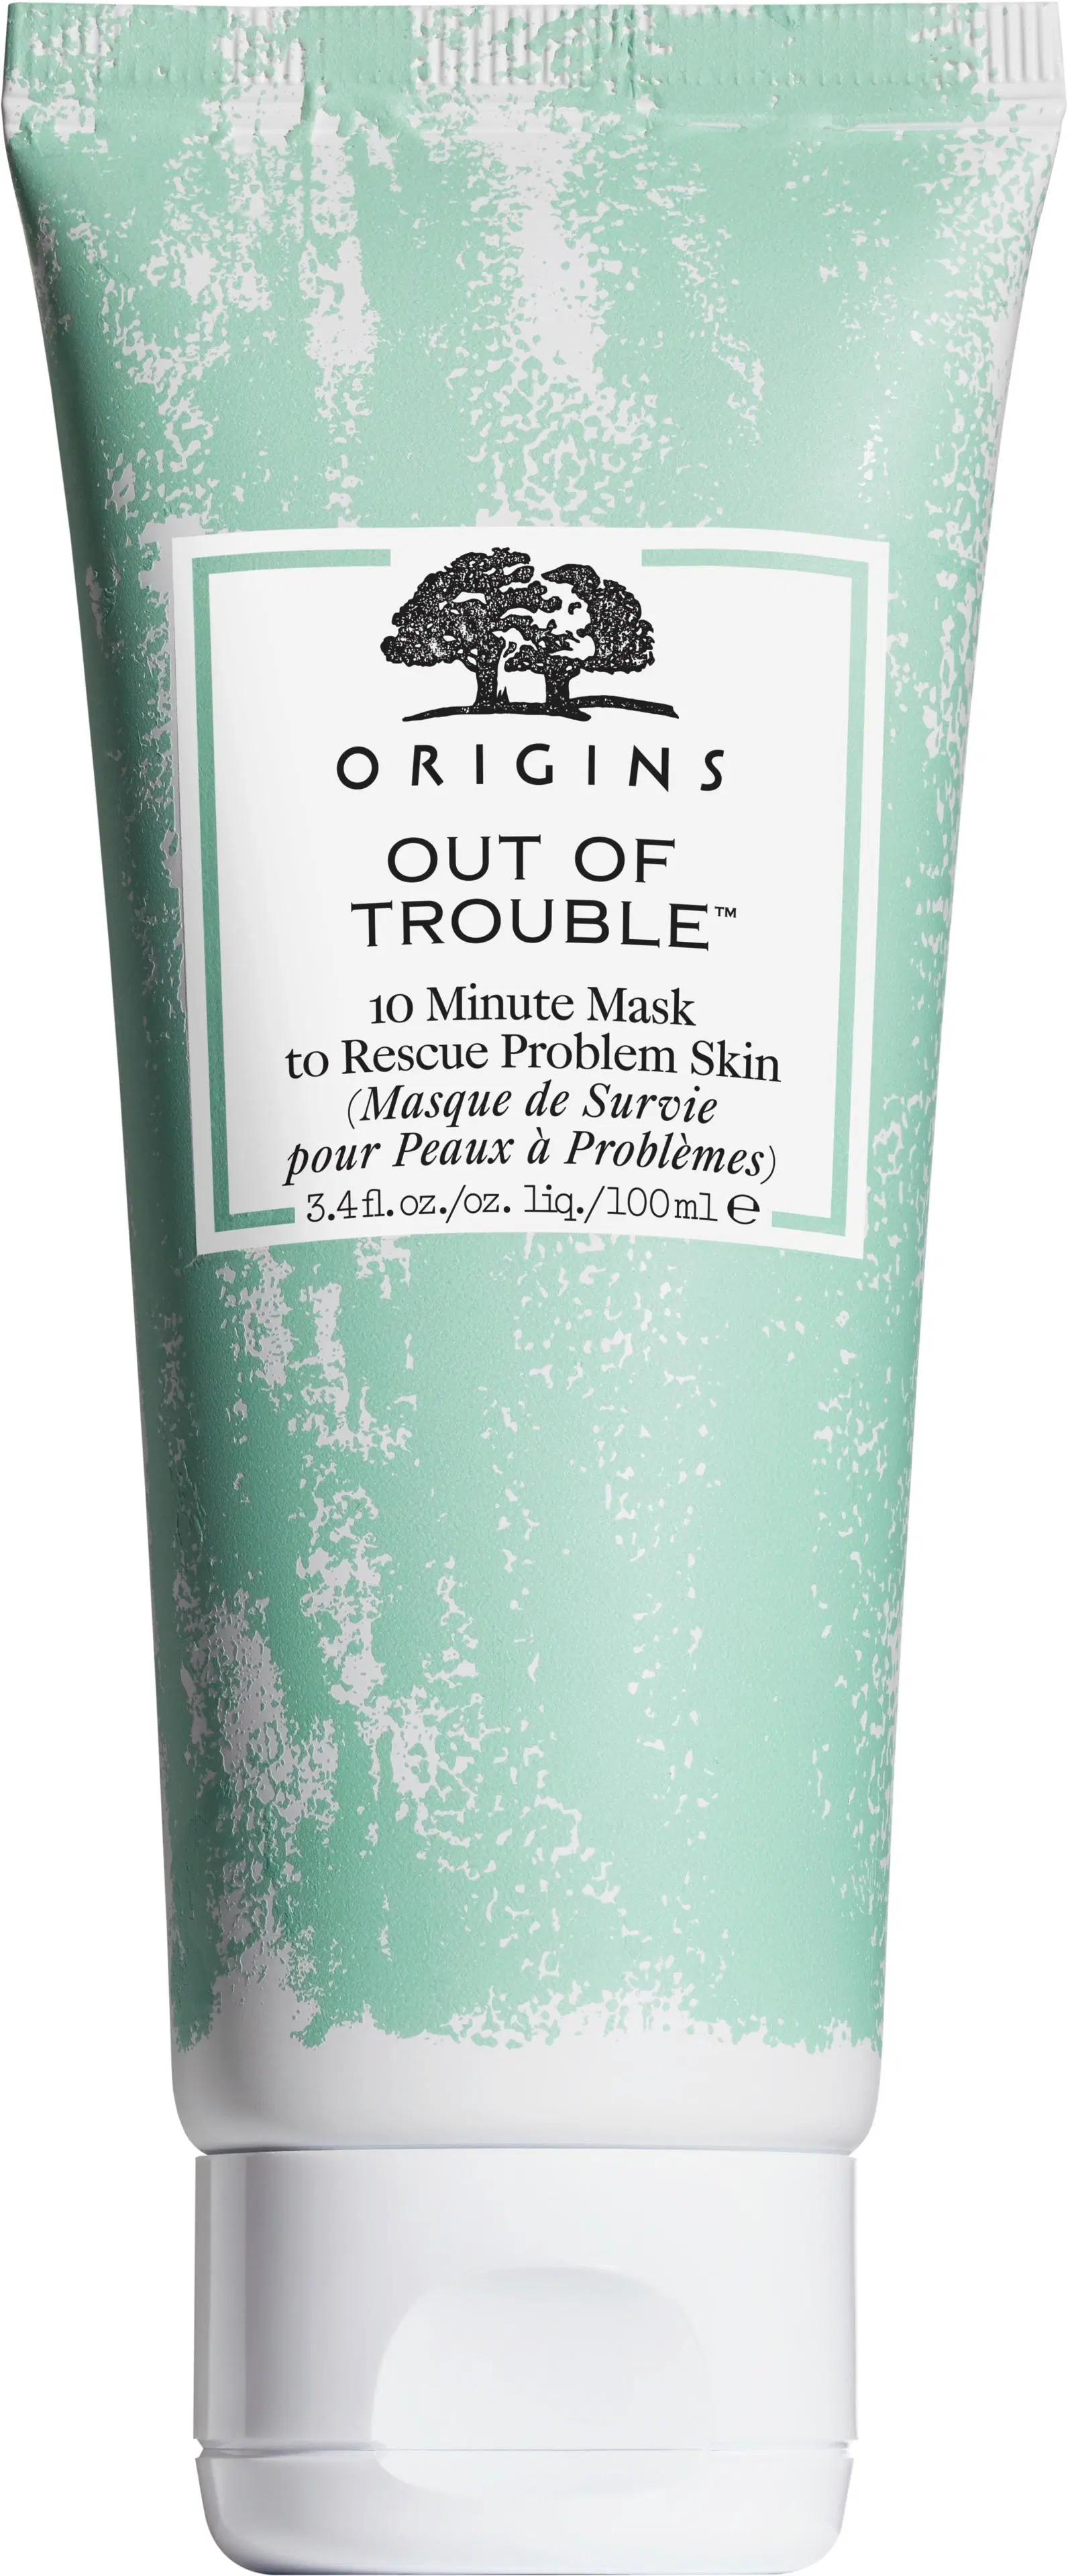 Origins Out of Trouble® 10 Minute Mask to Rescue Problem Skin naamio 100ml